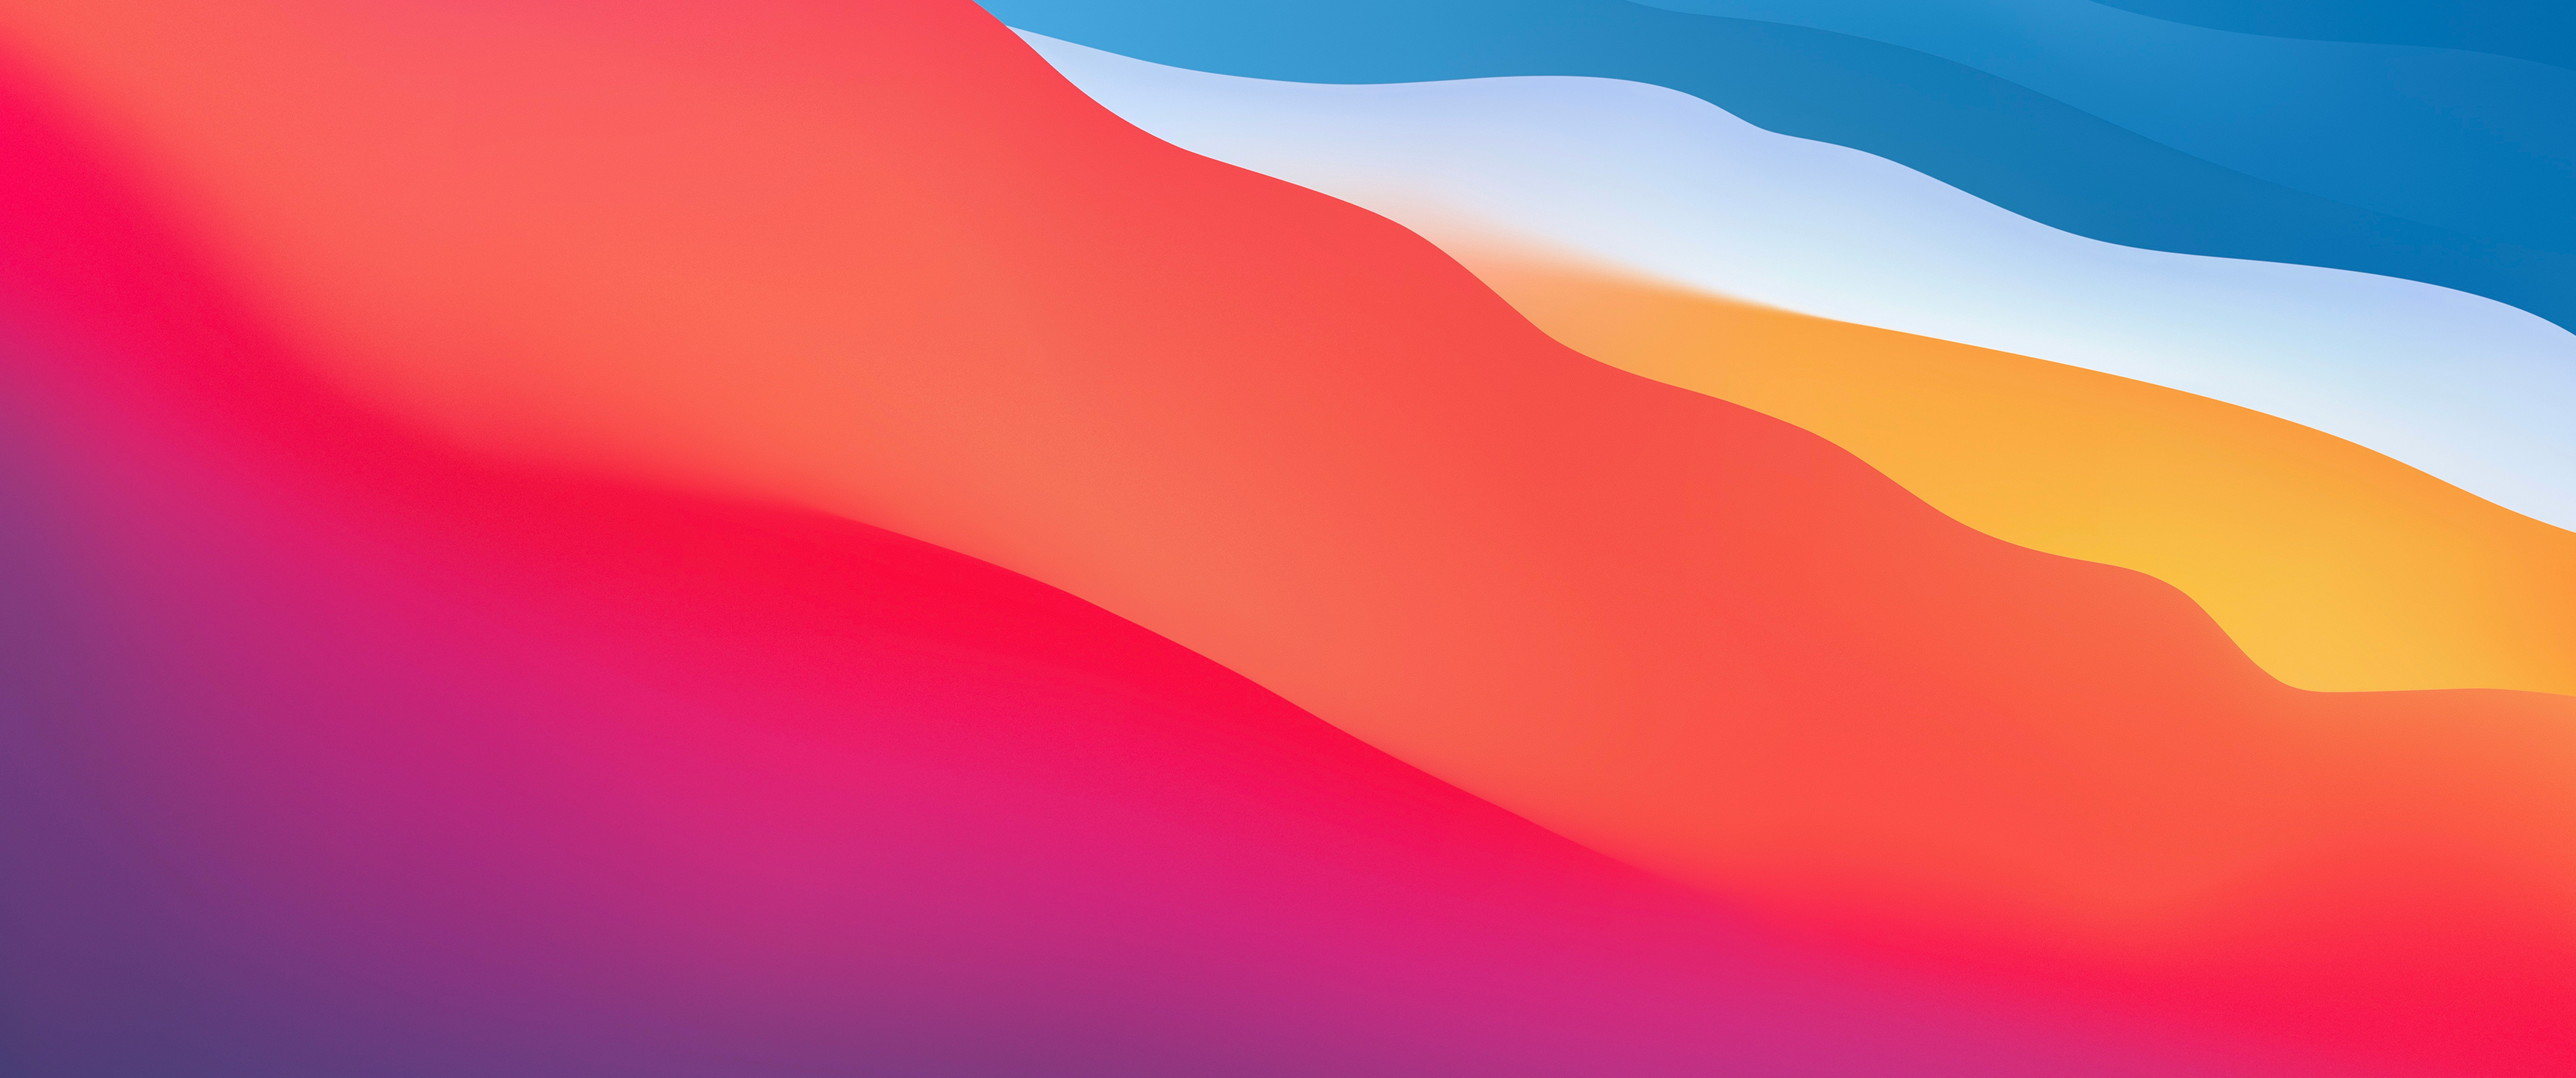 General 3440x1440 abstract colorful minimalism